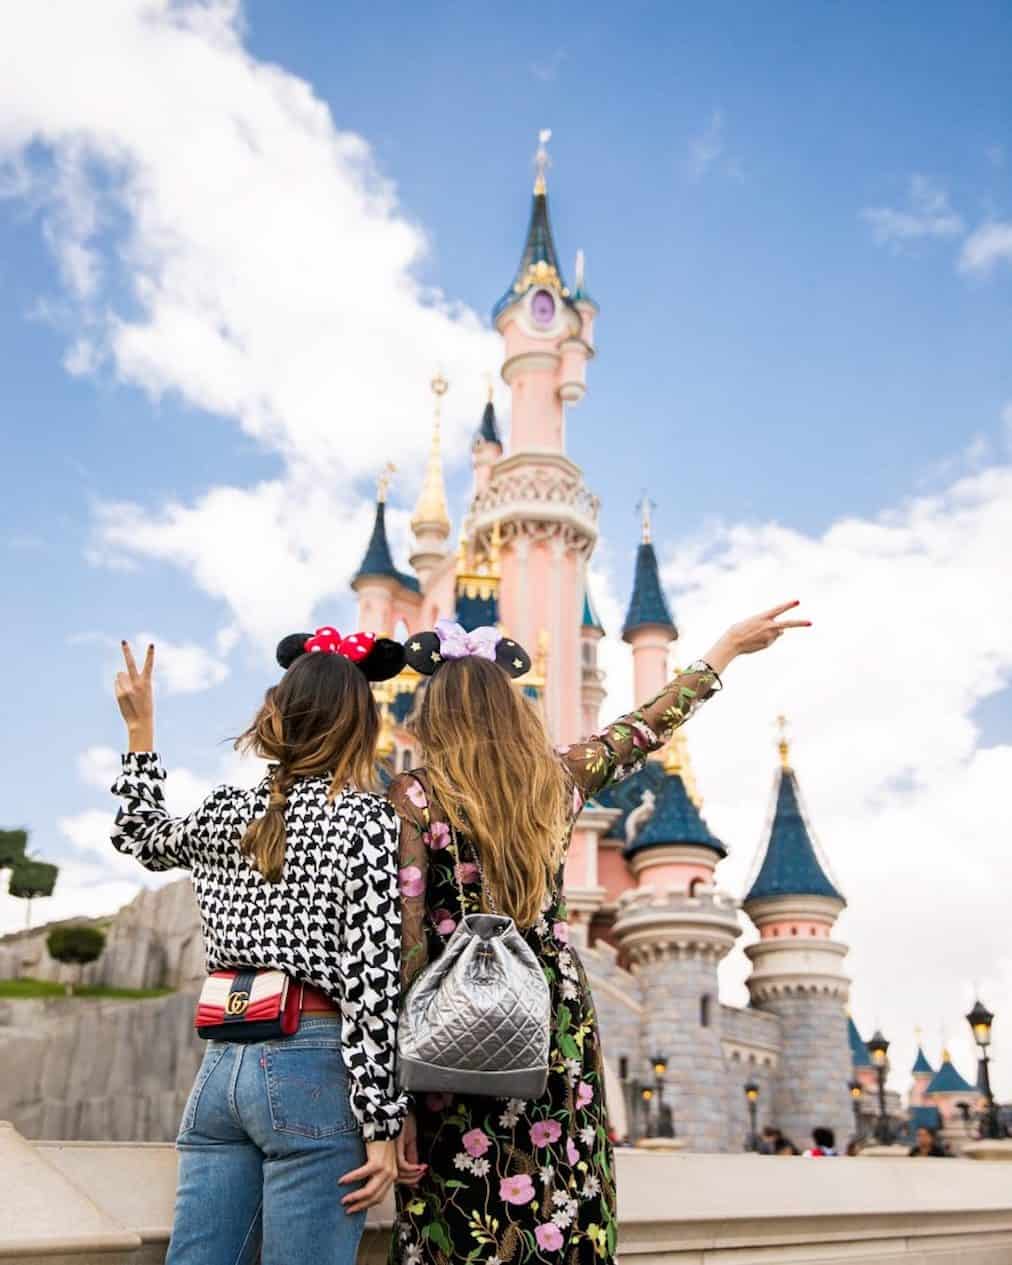 Girls in front of the Disney castle holding up the peace sign and wearing Minnie Mouse ears.